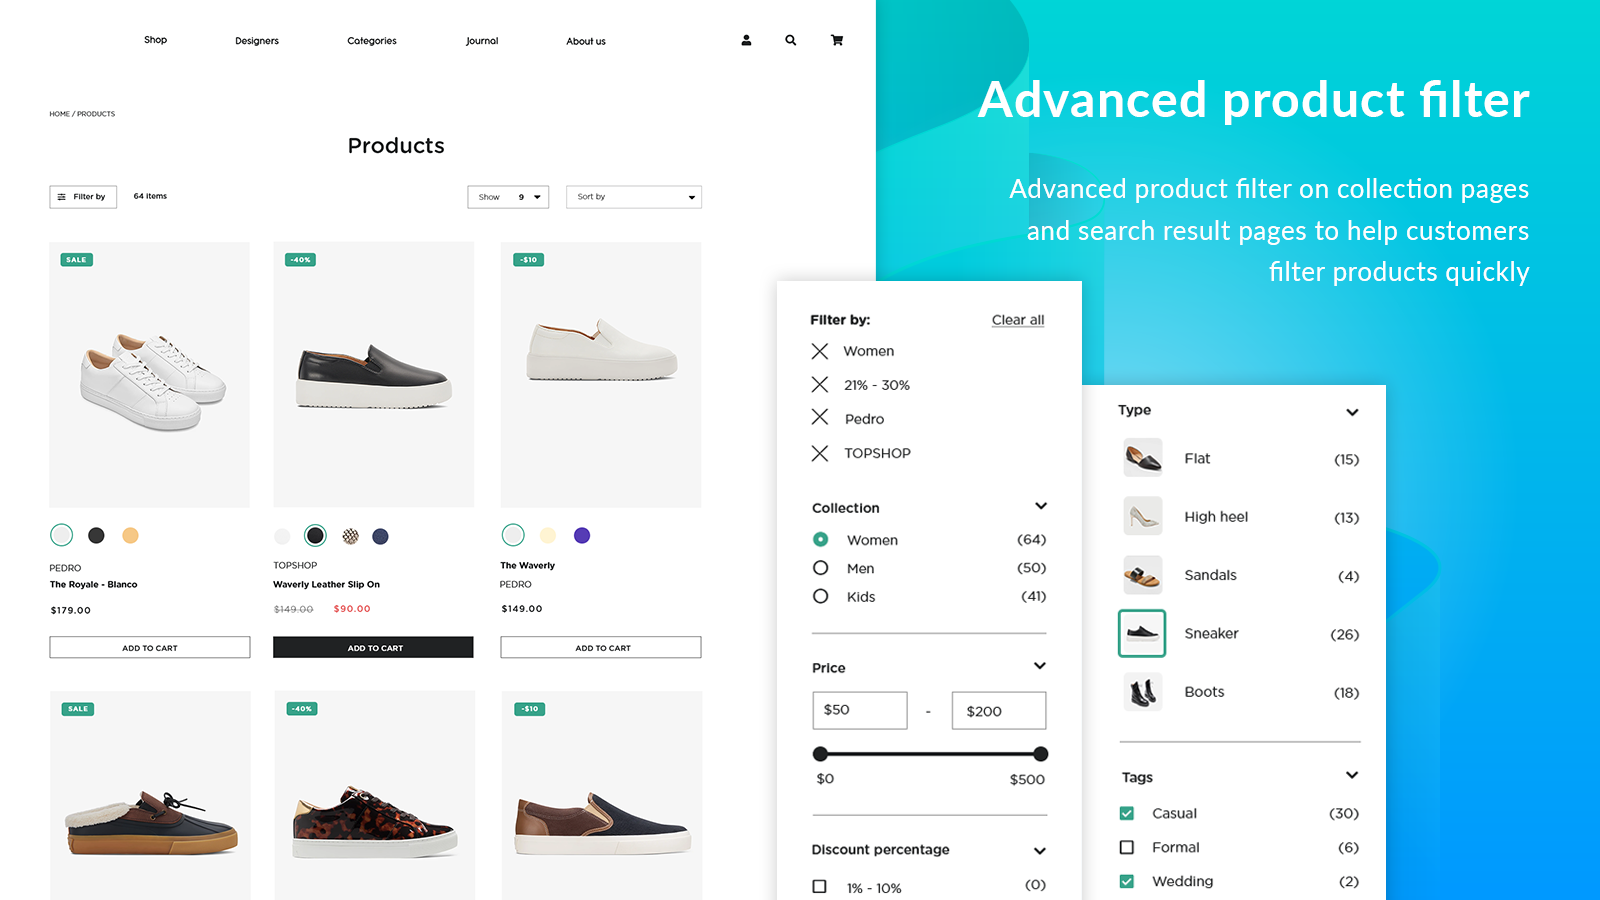 Advanced product filter on collection pages